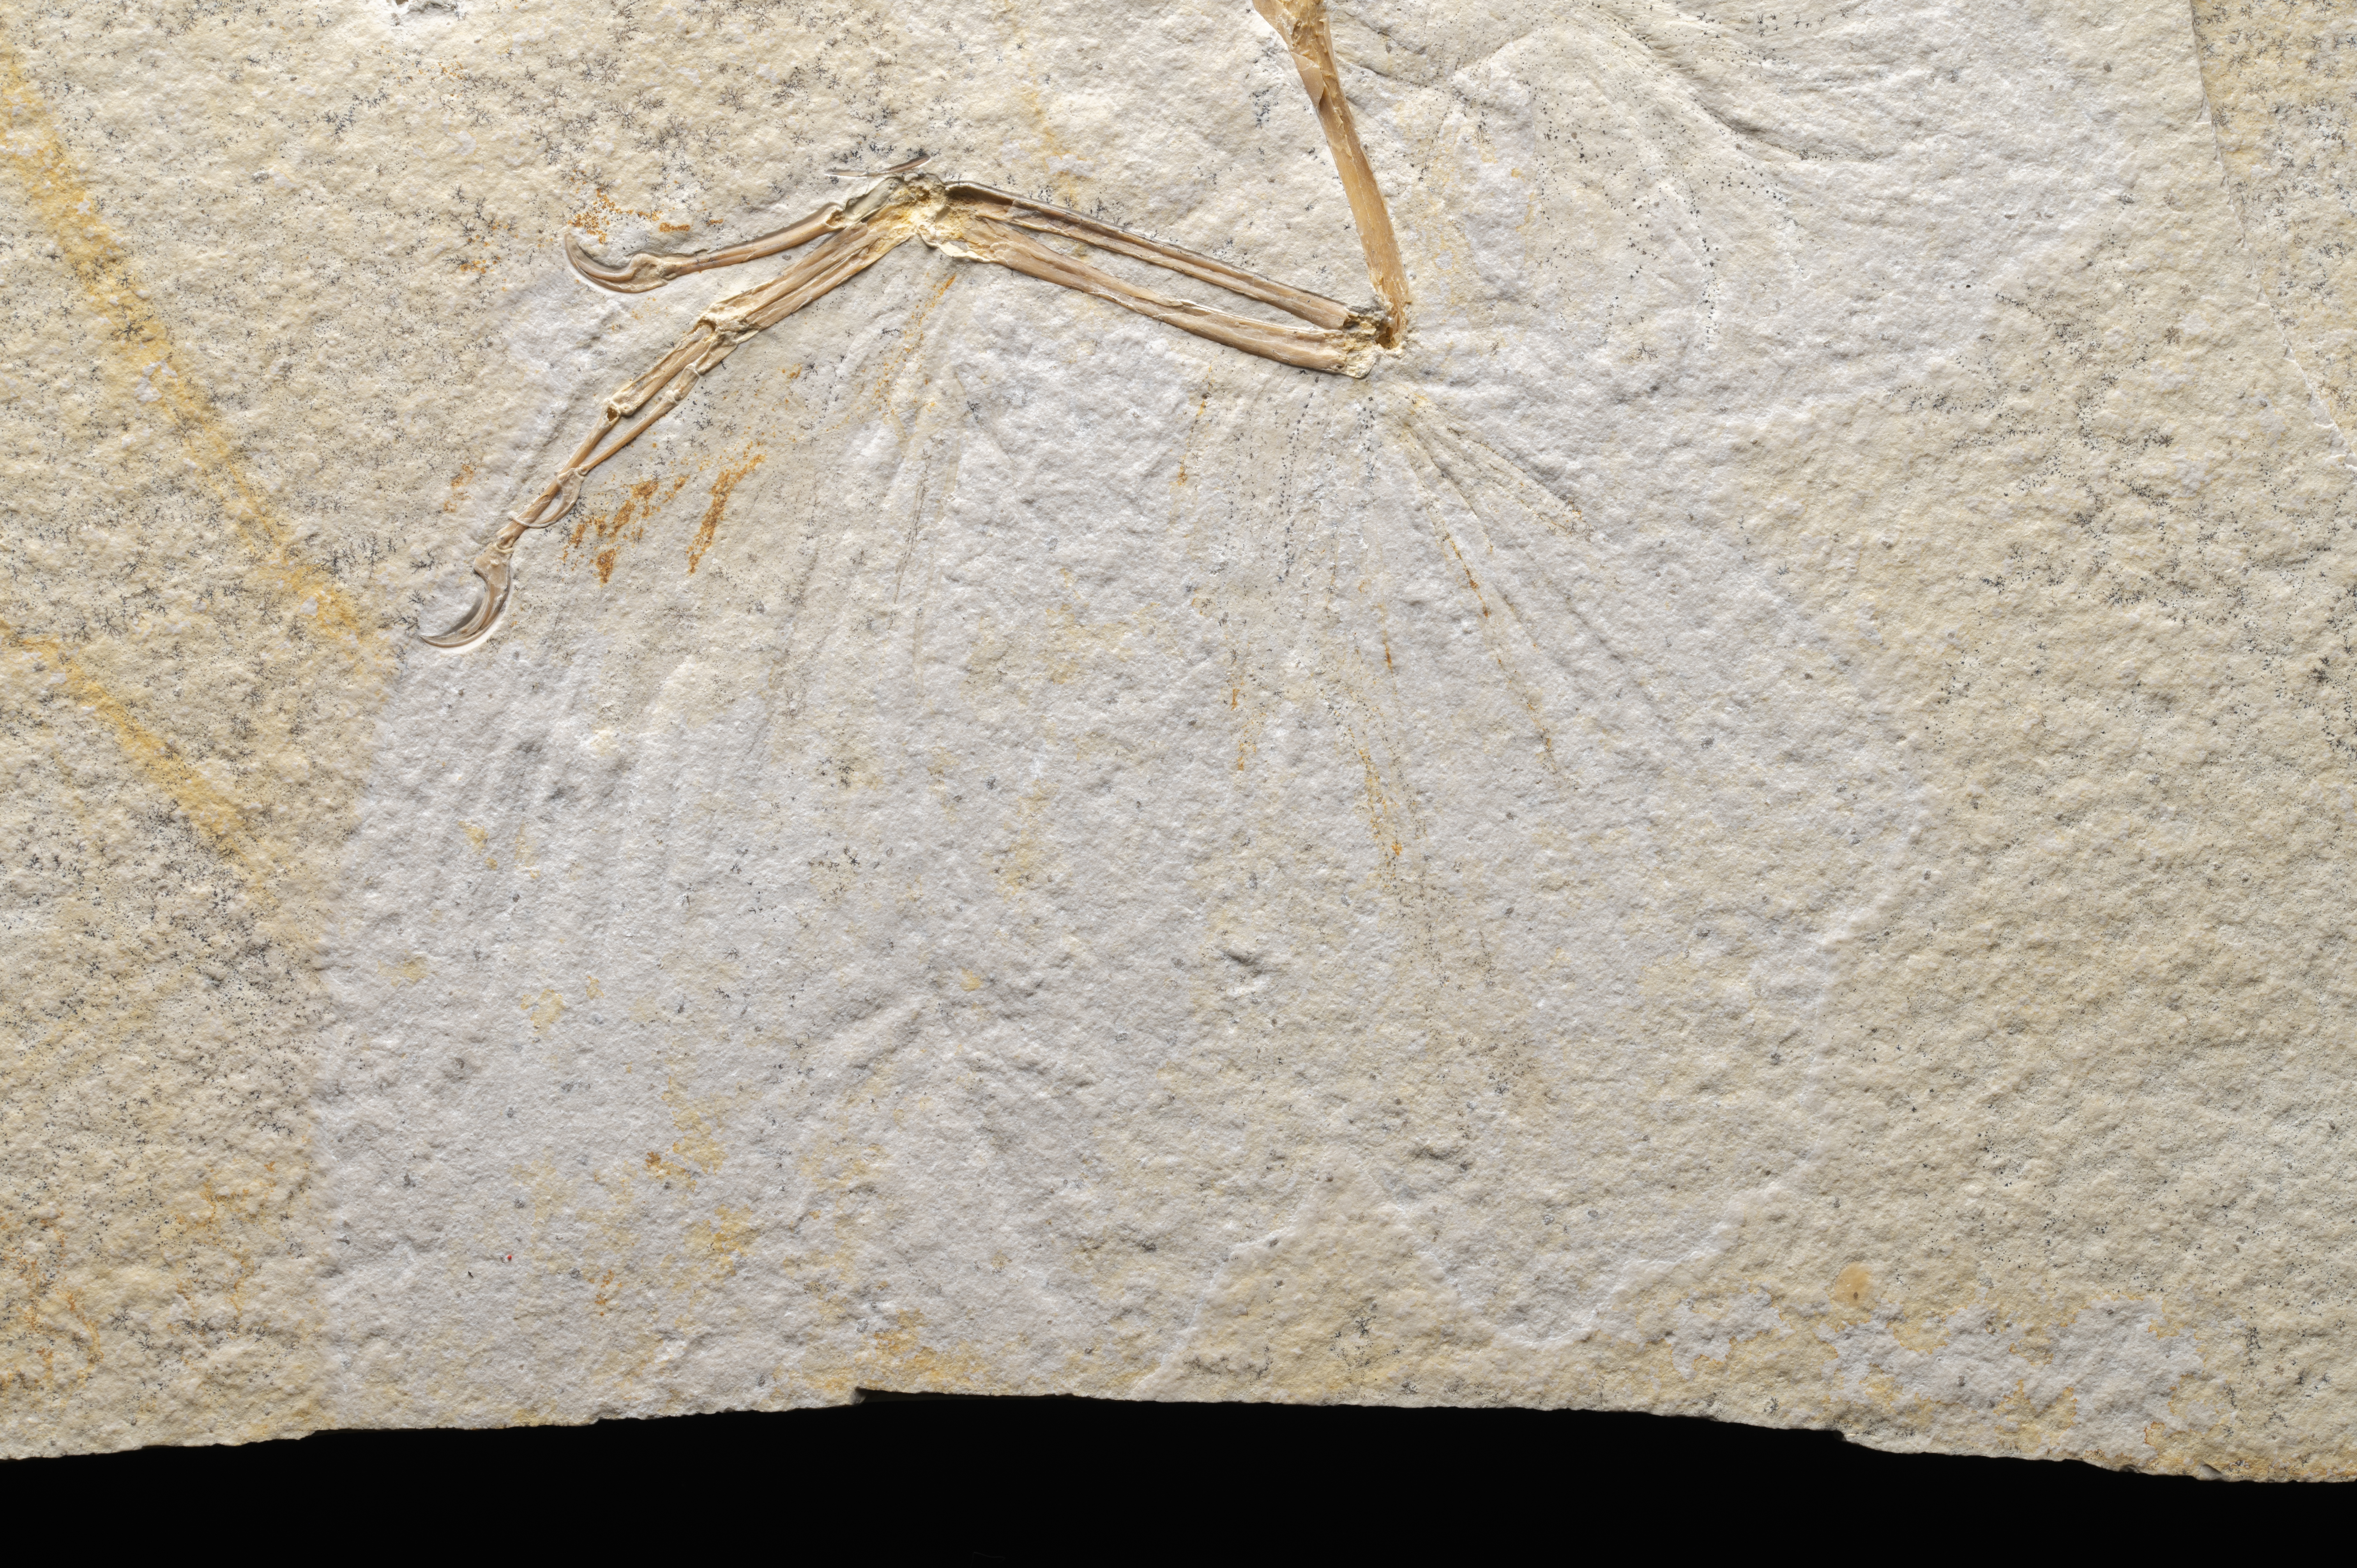 Fossil archaeopteryx wing, embedded in stone, showing detail of feathers